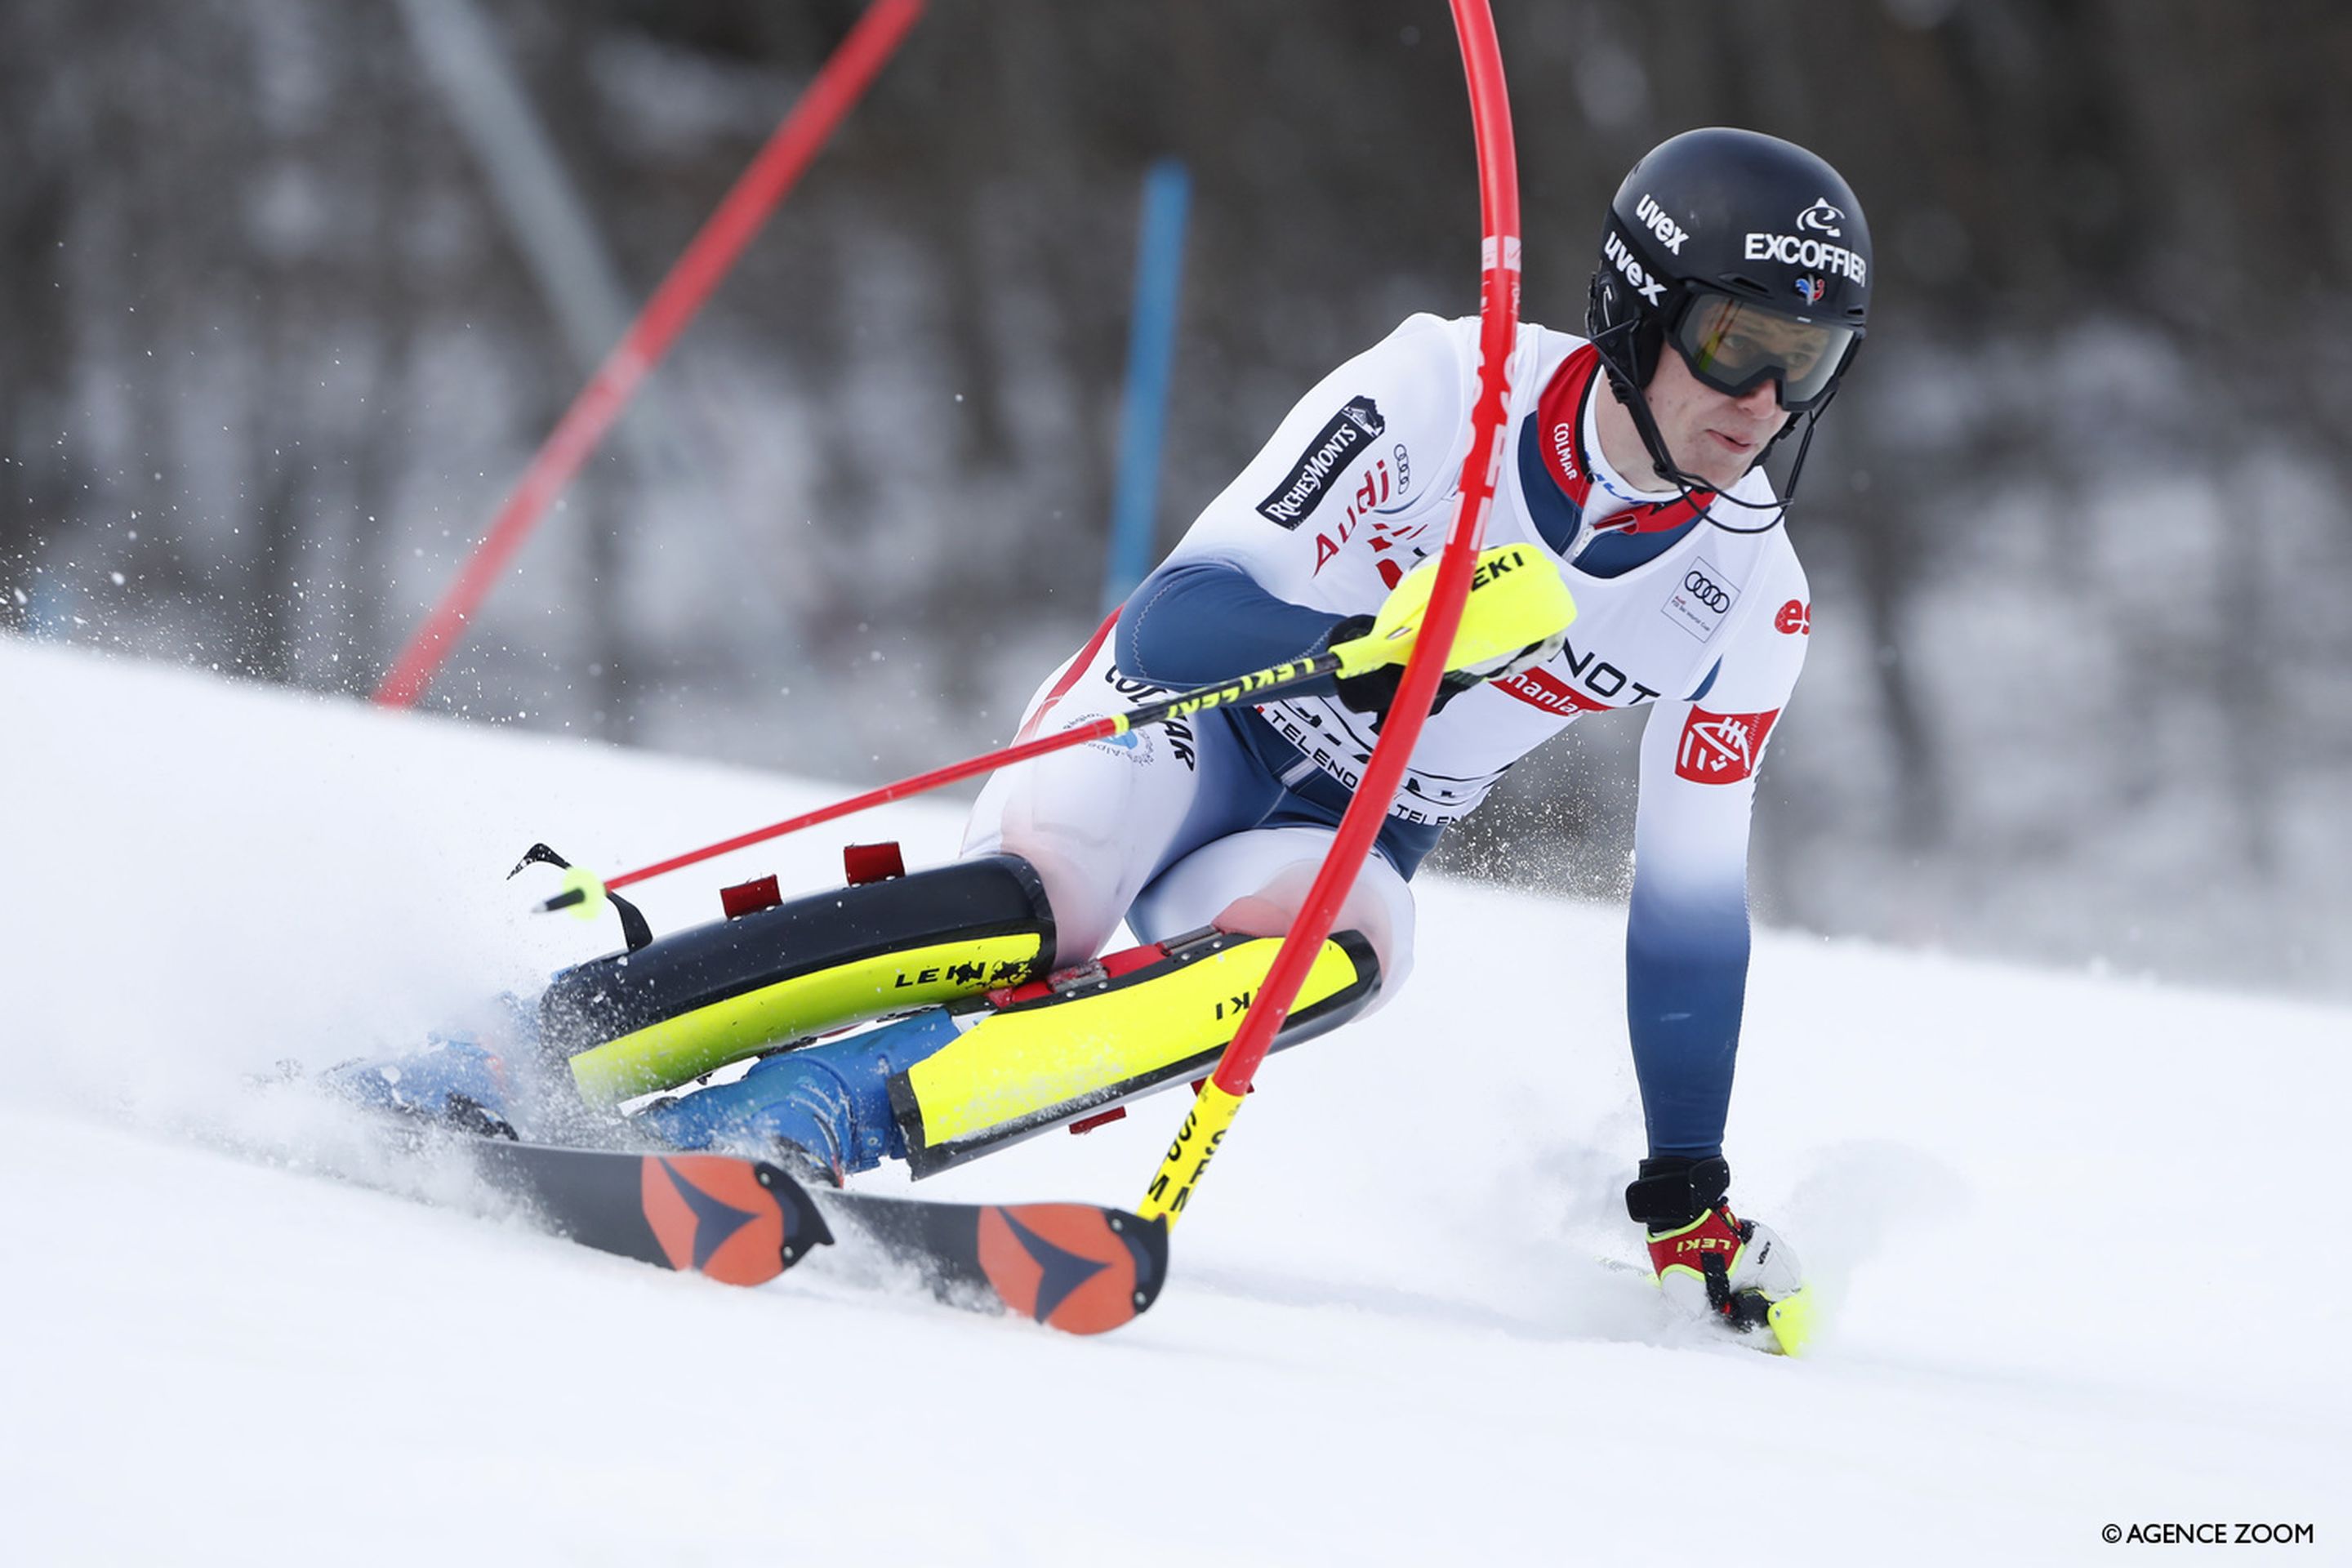 CHAMONIX, FRANCE - FEBRUARY 8: Clement Noel of France competes during the Audi FIS Alpine Ski World Cup Men's Slalom on February 8, 2020 in Chamonix France. (Photo by Alexis Boichard/Agence Zoom)